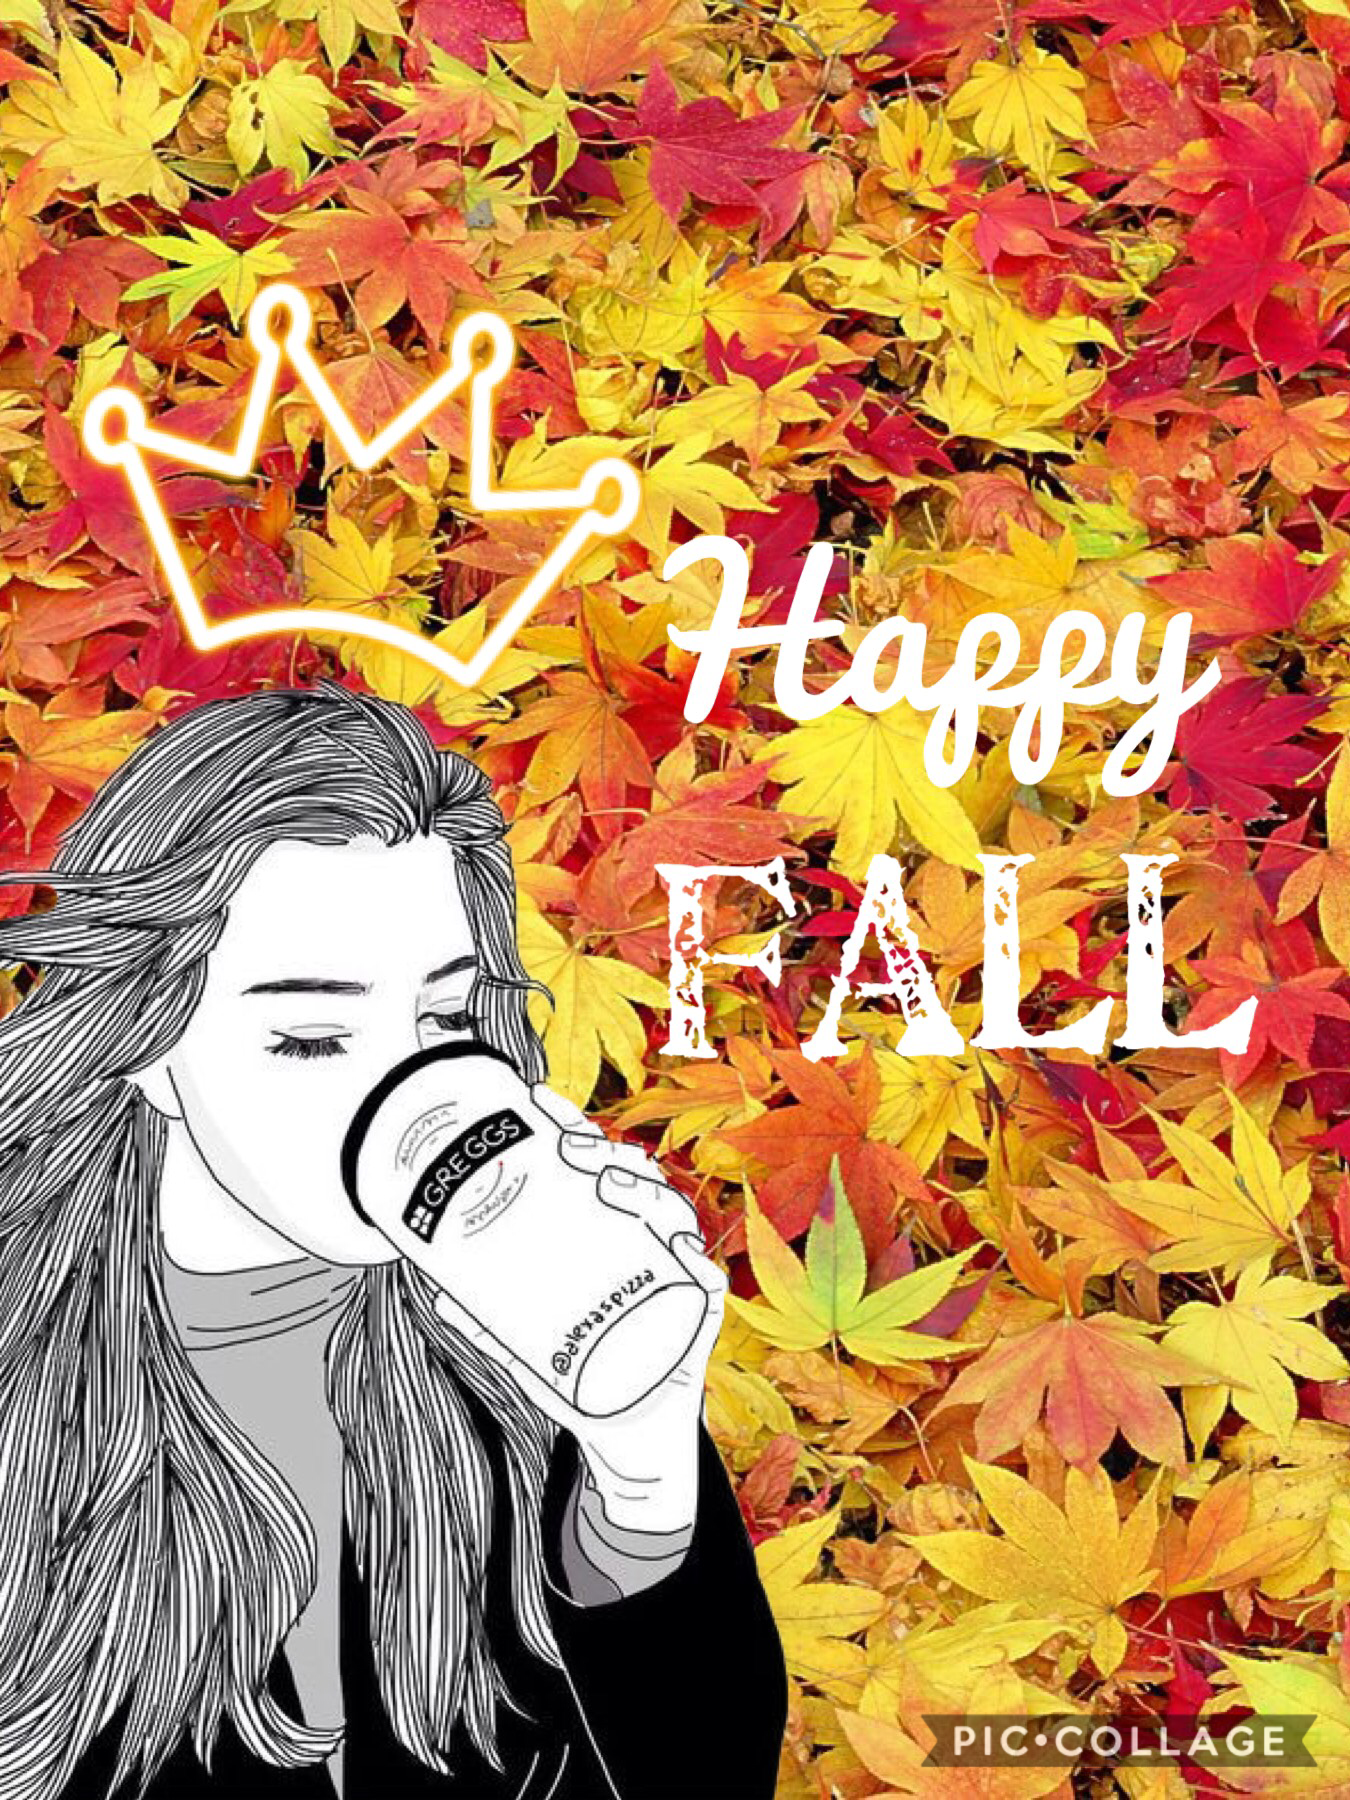 What’s your favorite fall drink?